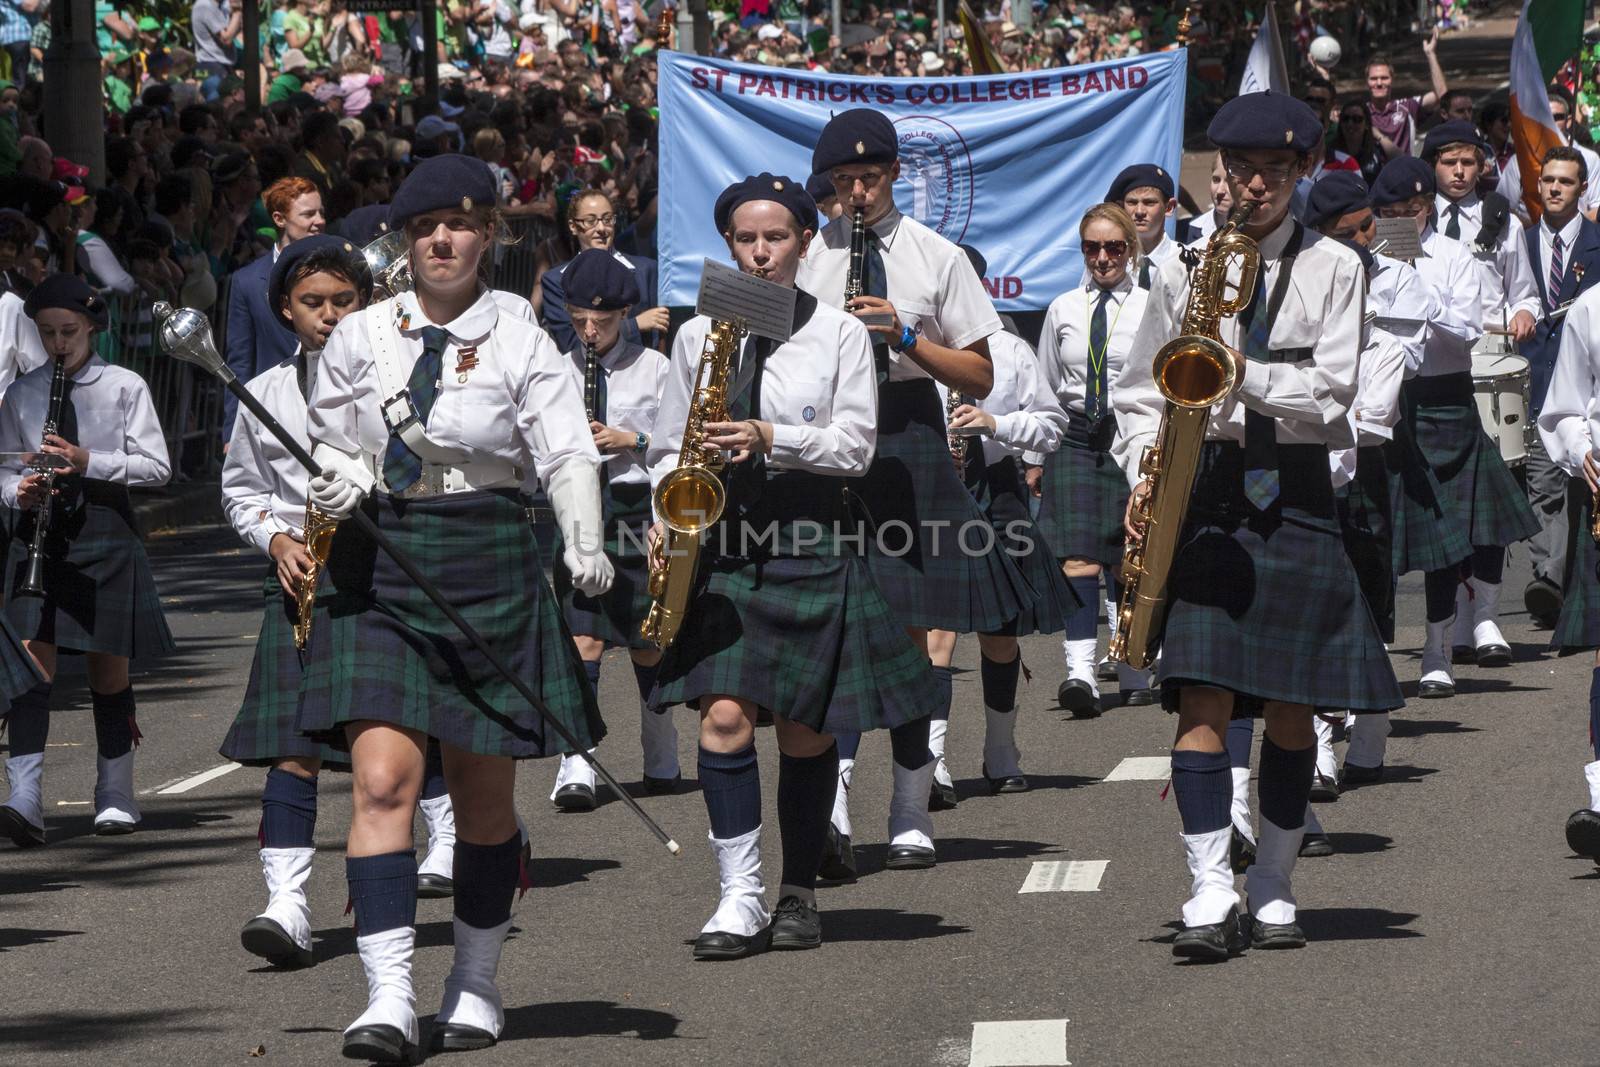 SYDNEY, AUSTRALIA - Mar 17TH: St Patrick's College band during t by khellon